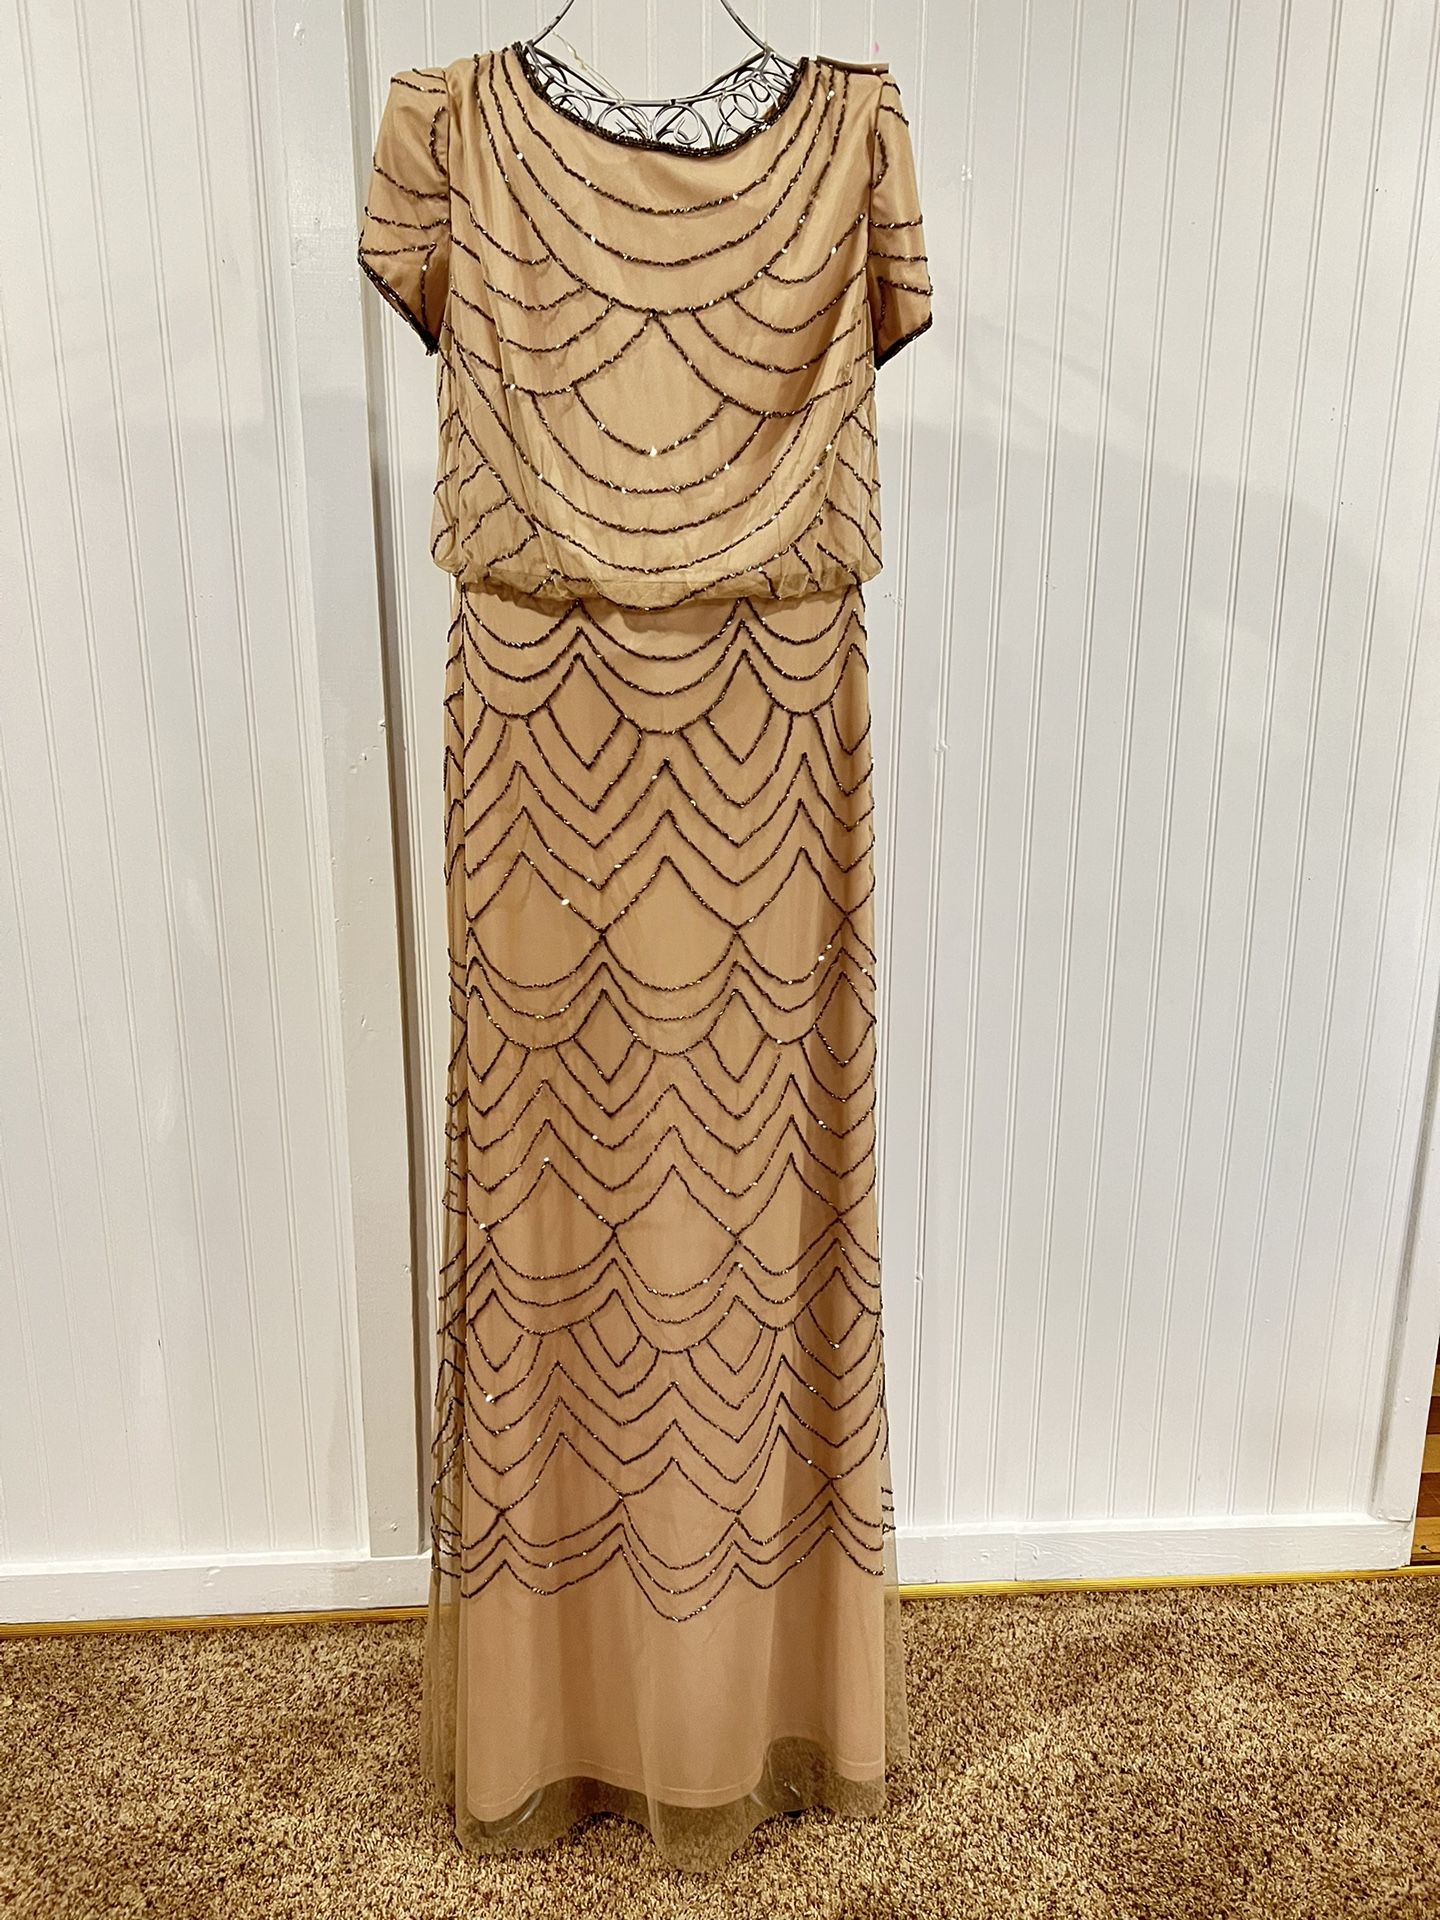 Adrianna Papell  long dresses size 14